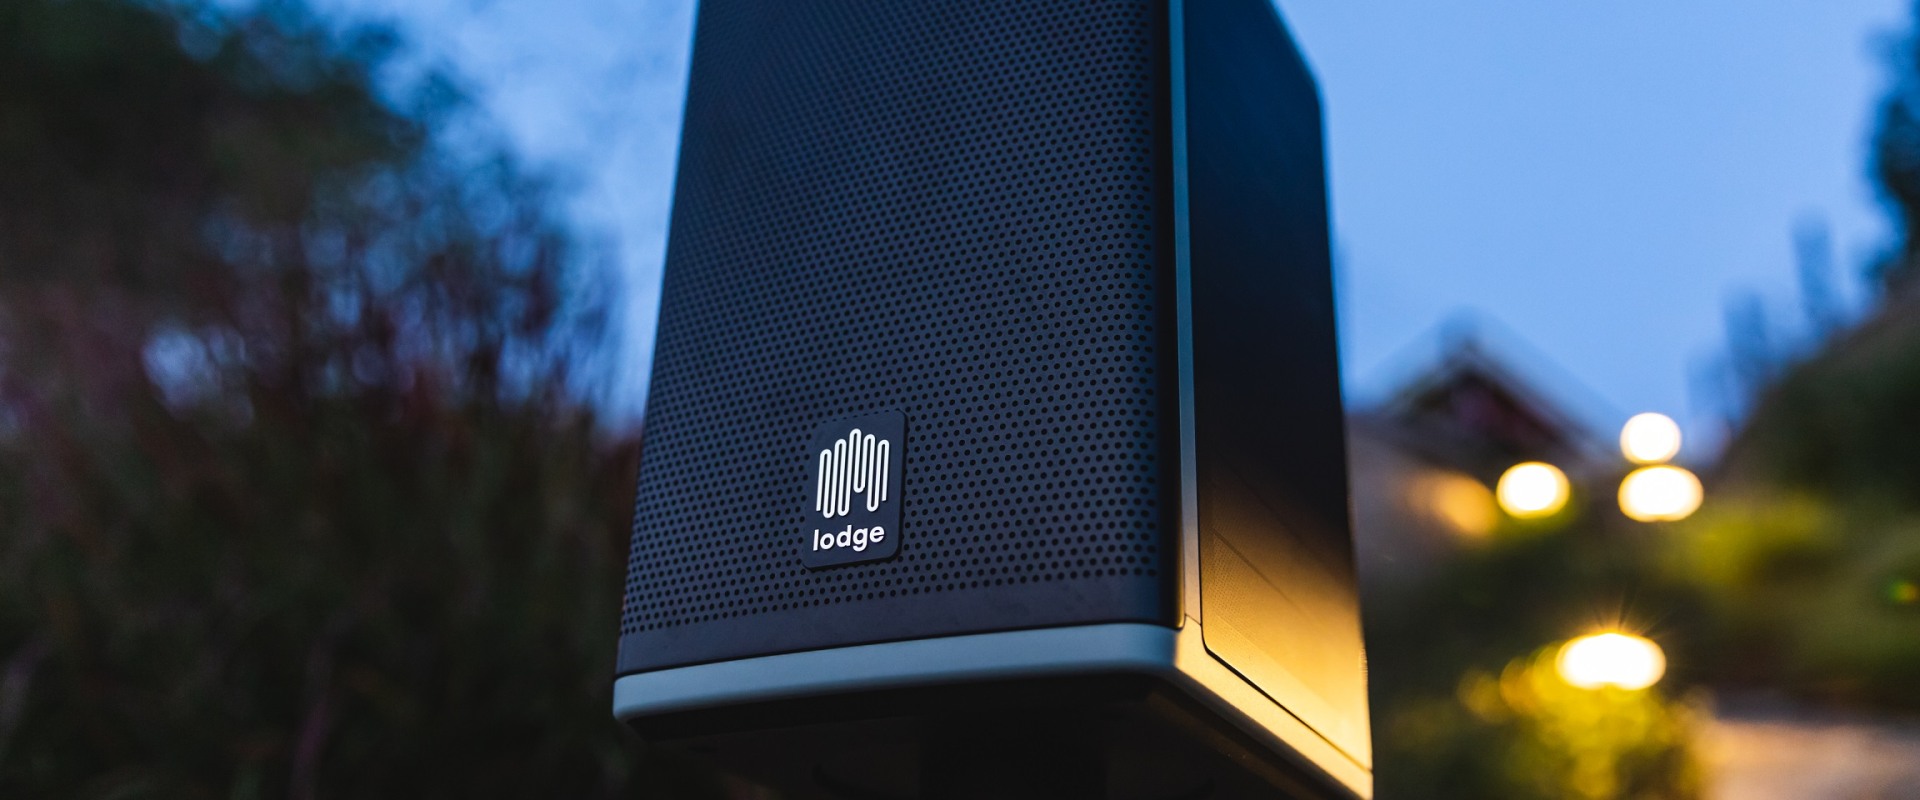 Solar Speaker Reviews: What You Need to Know